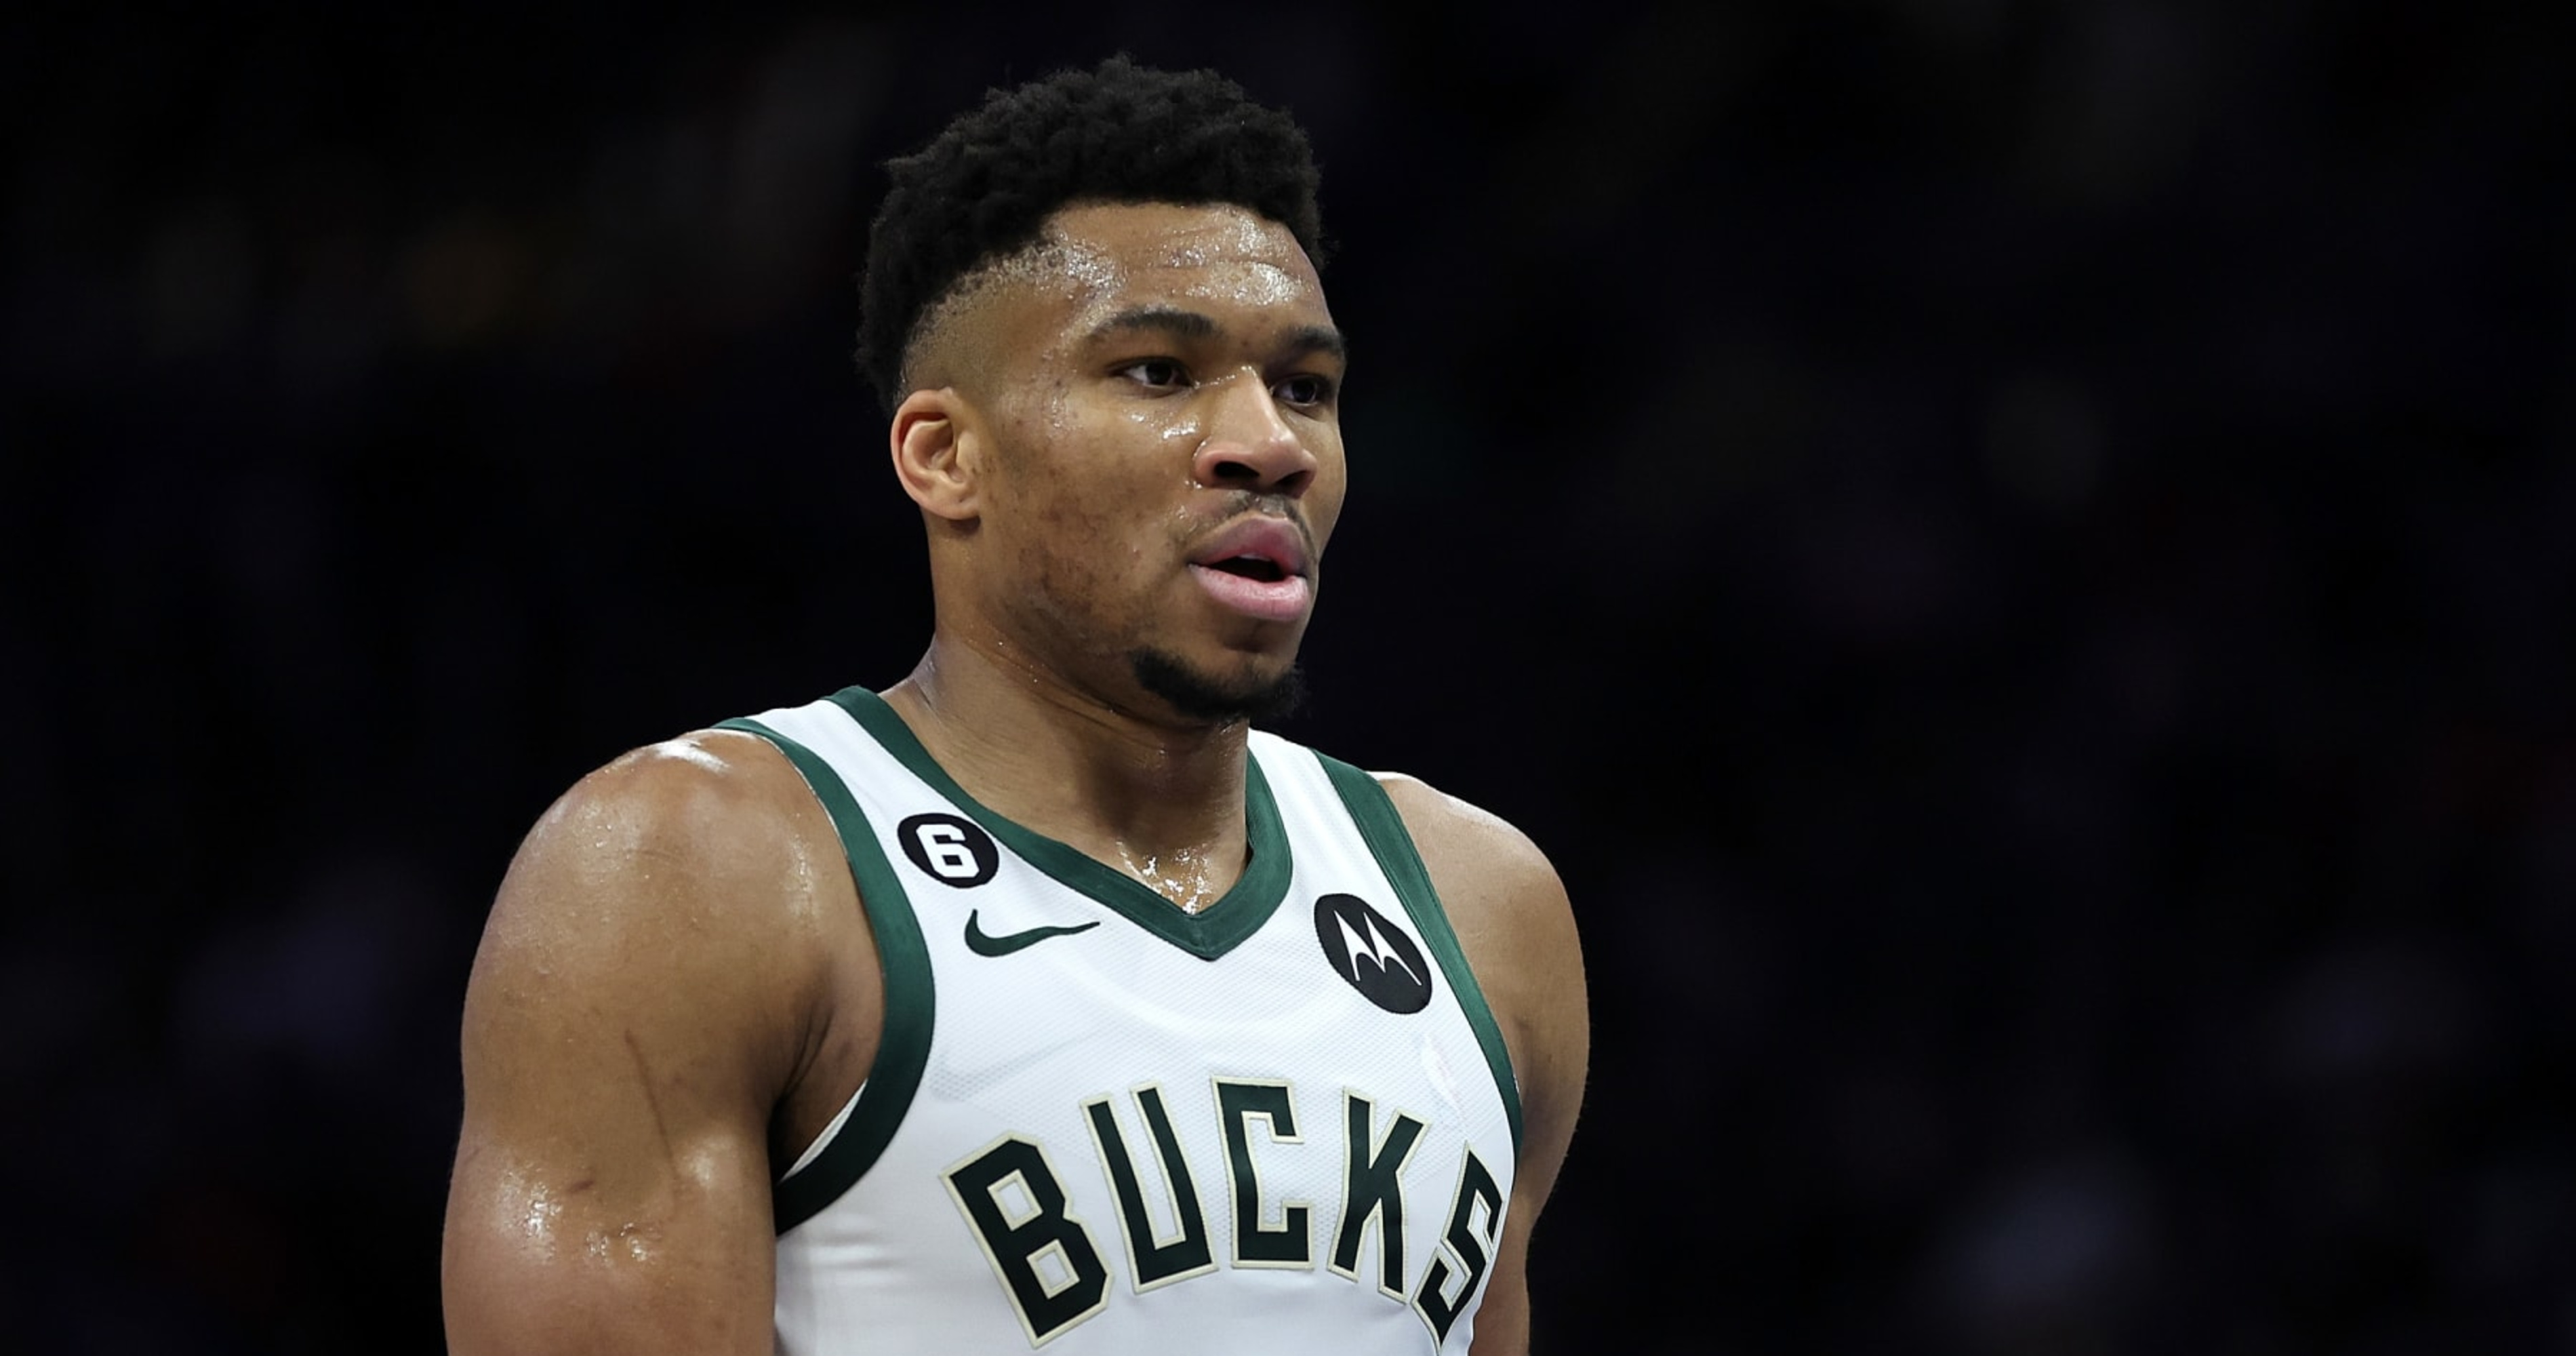 Giannis Antetokounmpo shares he was ready to retire from the NBA